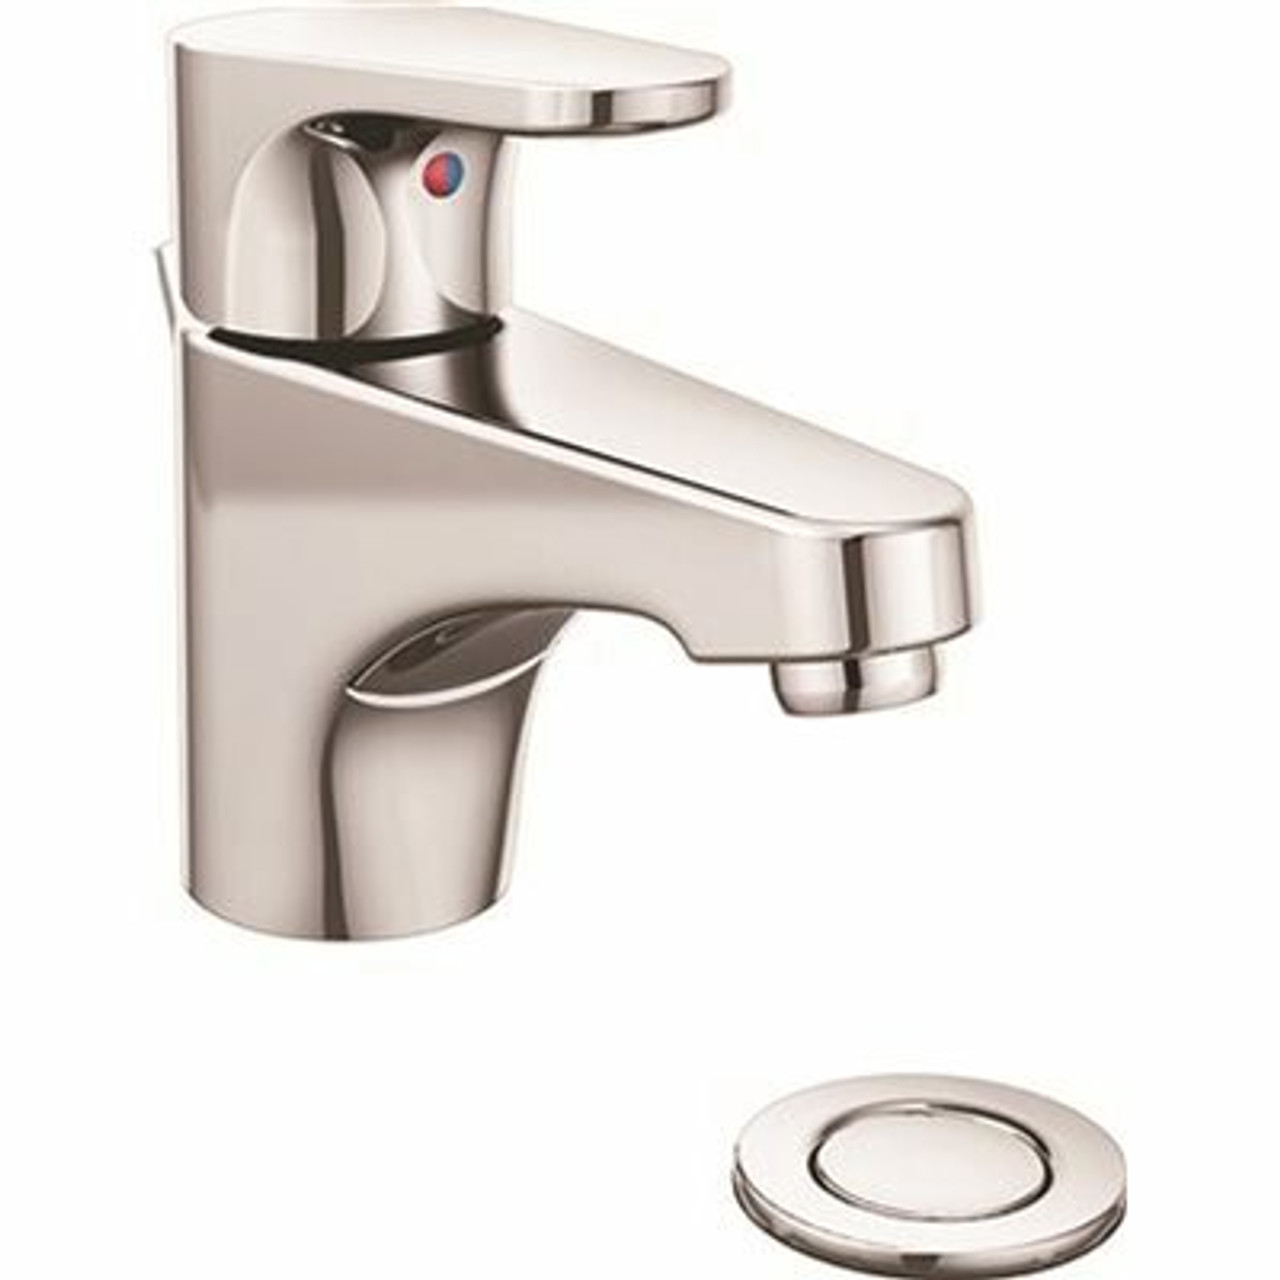 Cleveland Faucet Group Edgestone Single Hole Single Handle Bathroom Faucet With Drain Assembly In Chrome